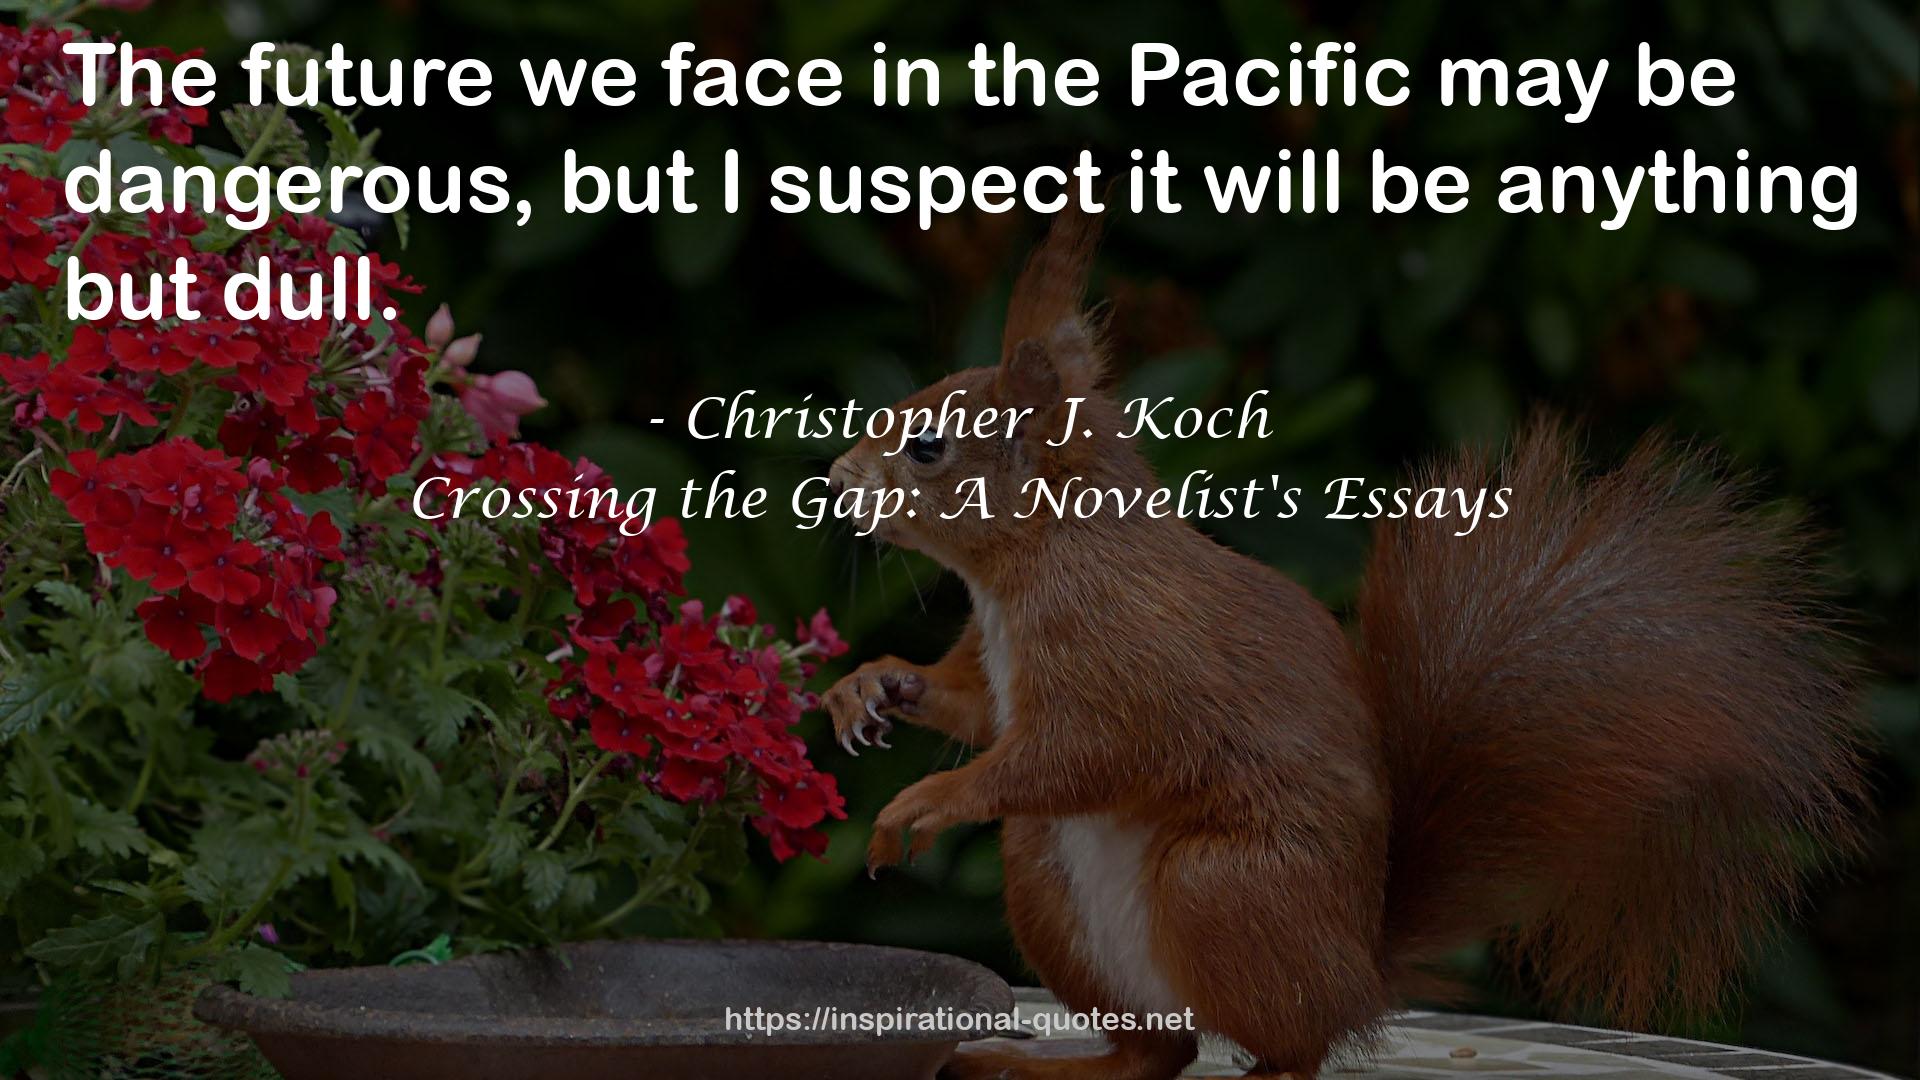 Christopher J. Koch QUOTES